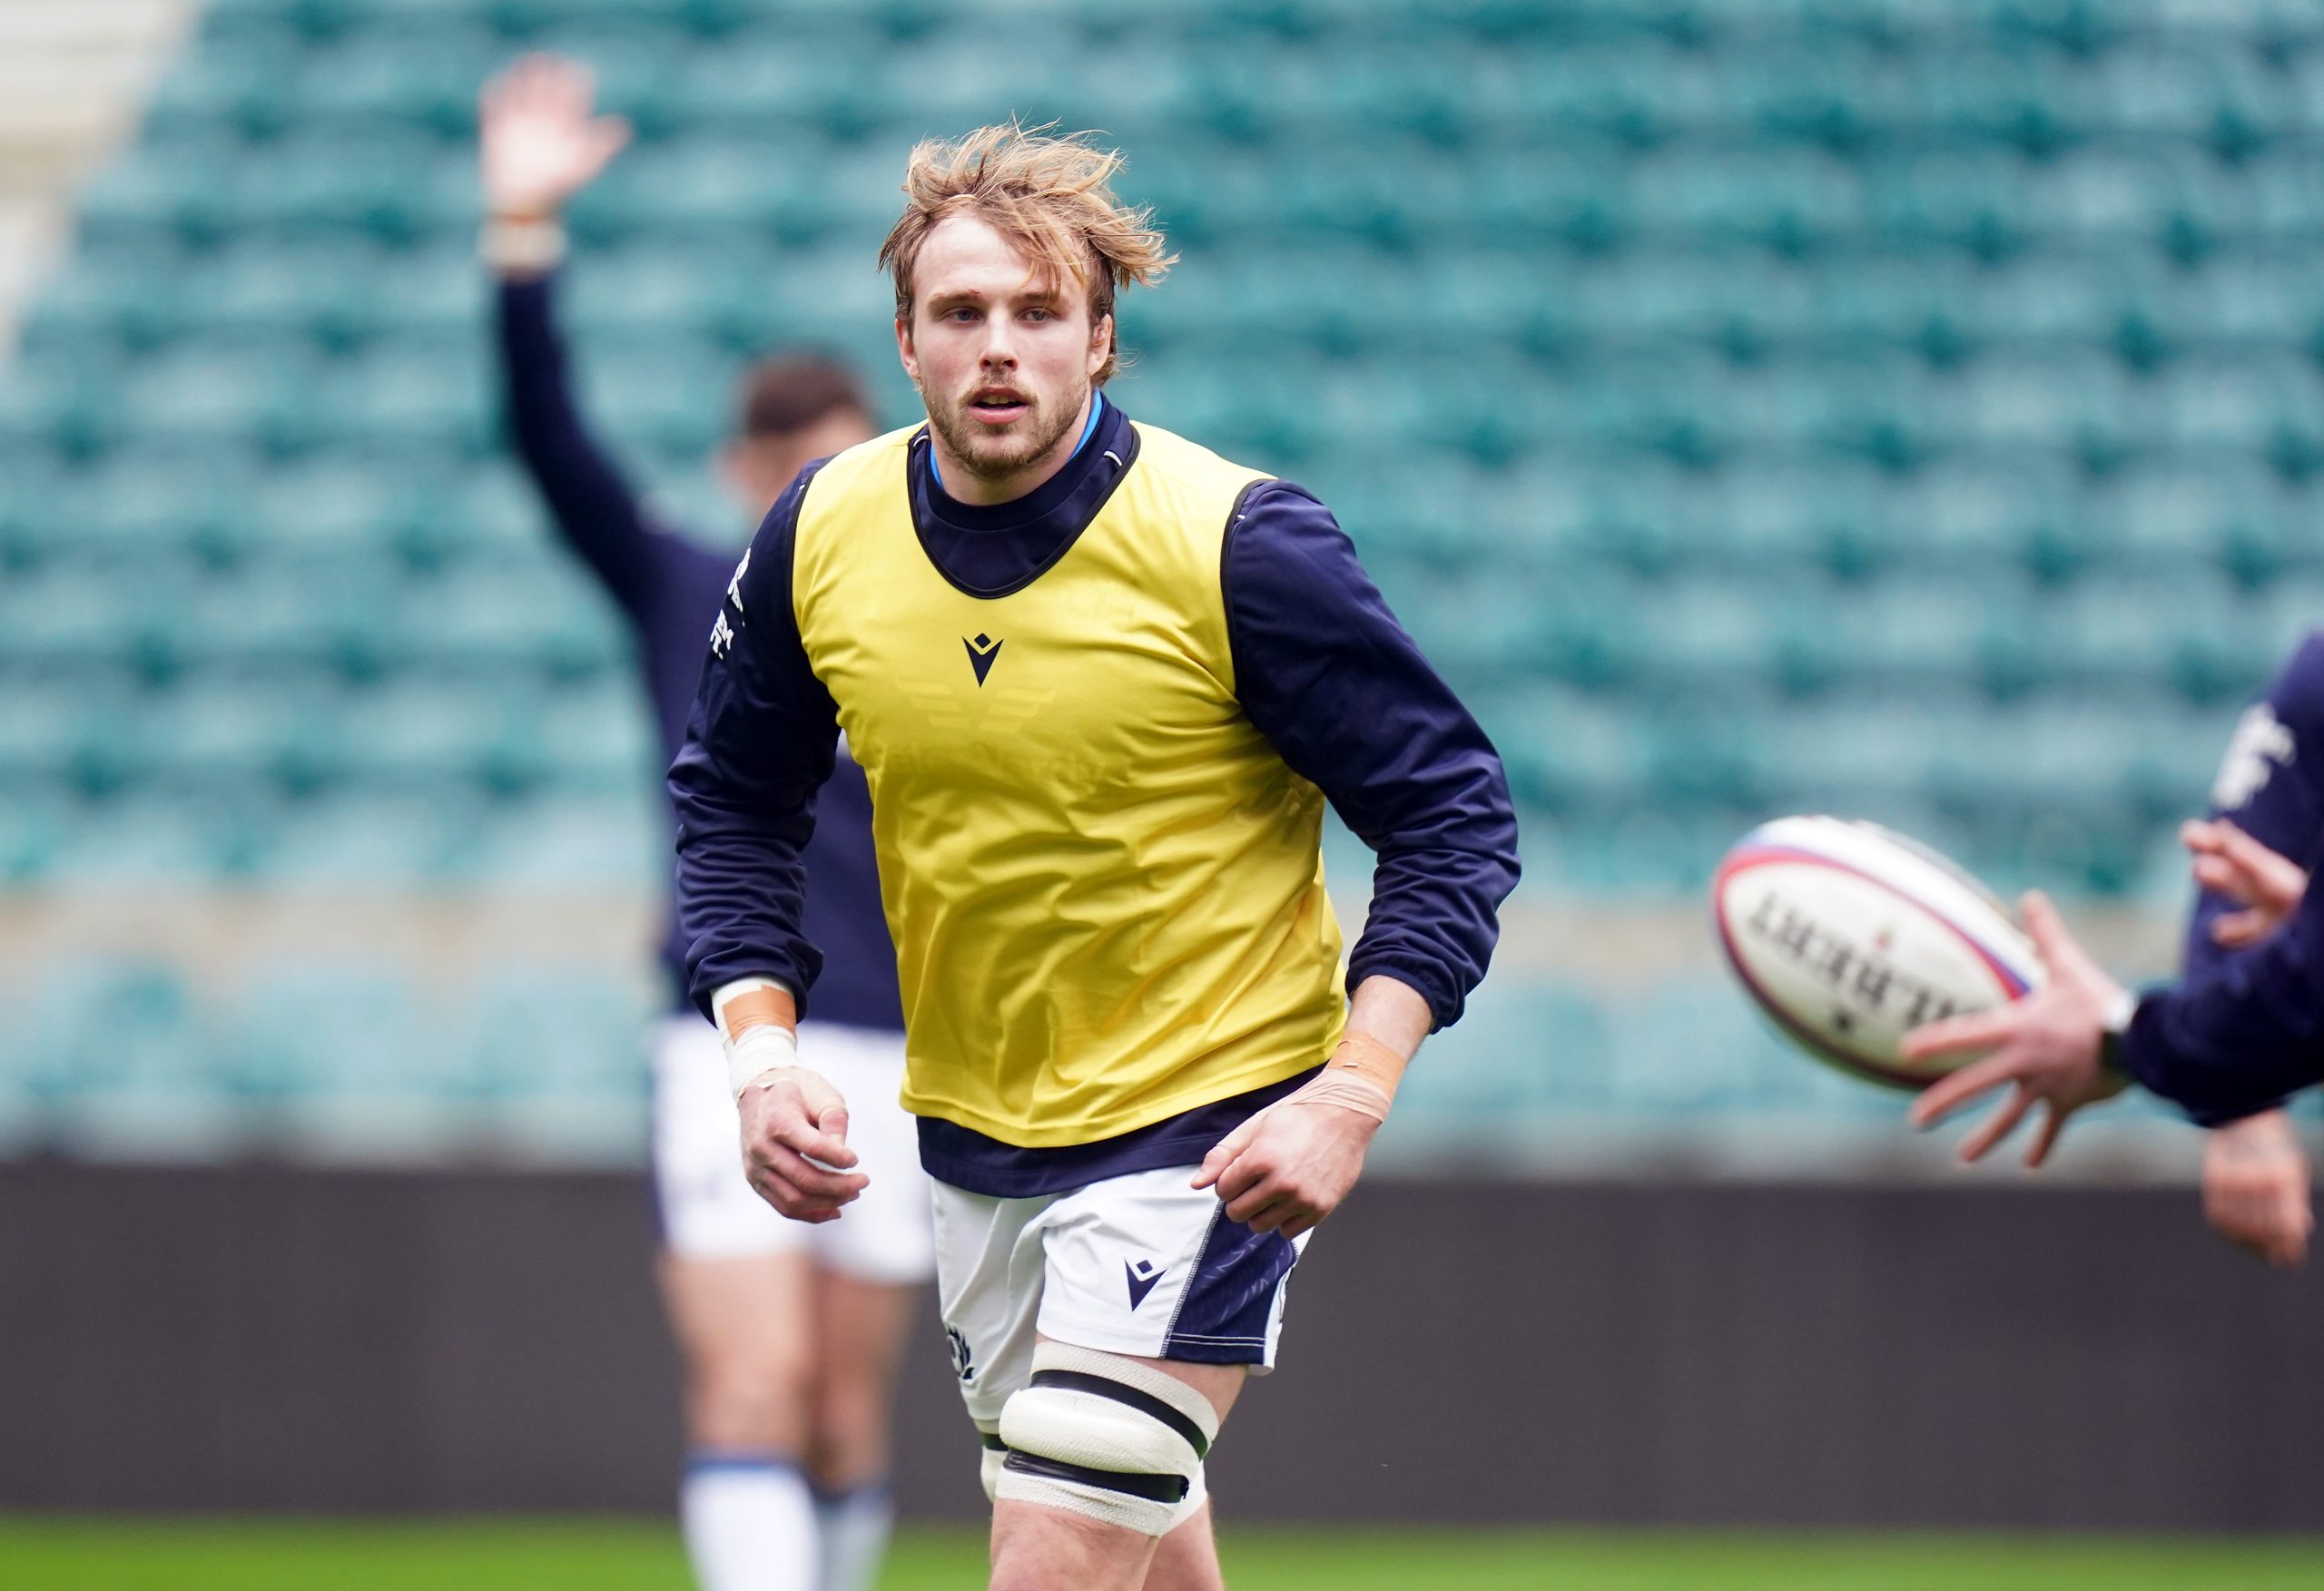 Scotland’s Jonny Gray doubtful for Rugby World Cup after dislocating knee